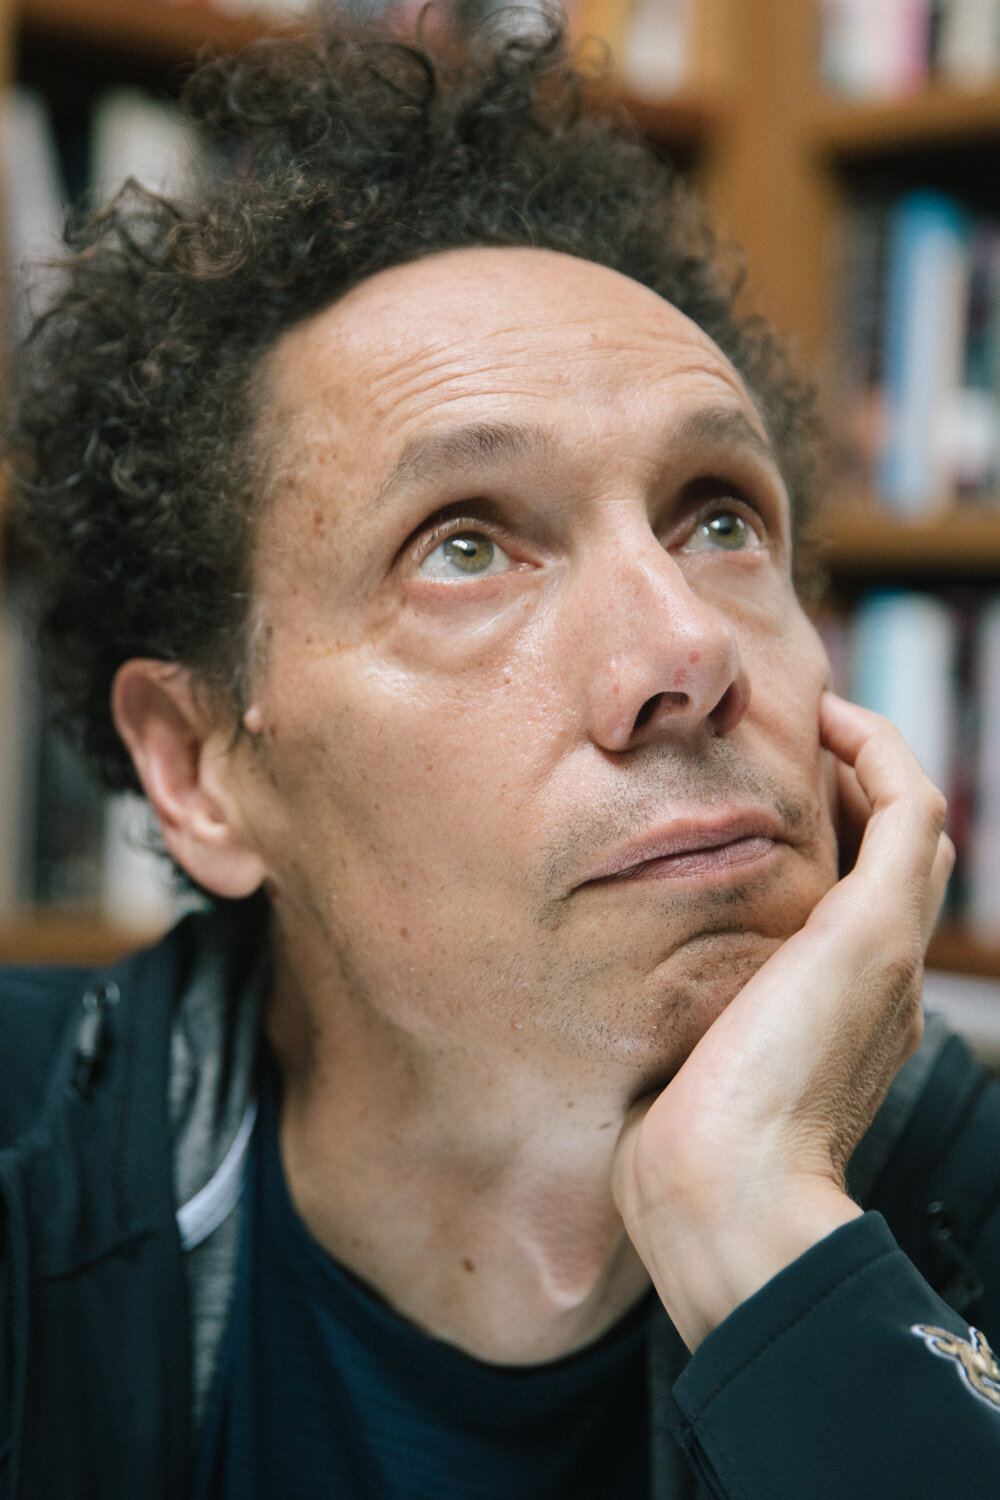  NEW YORK CITY 2019 08 28 Malcolm Gladwell, award-winning writer and journalist. Shot on assignment in Greenwich Village, New York for Dagens Nyheter. 